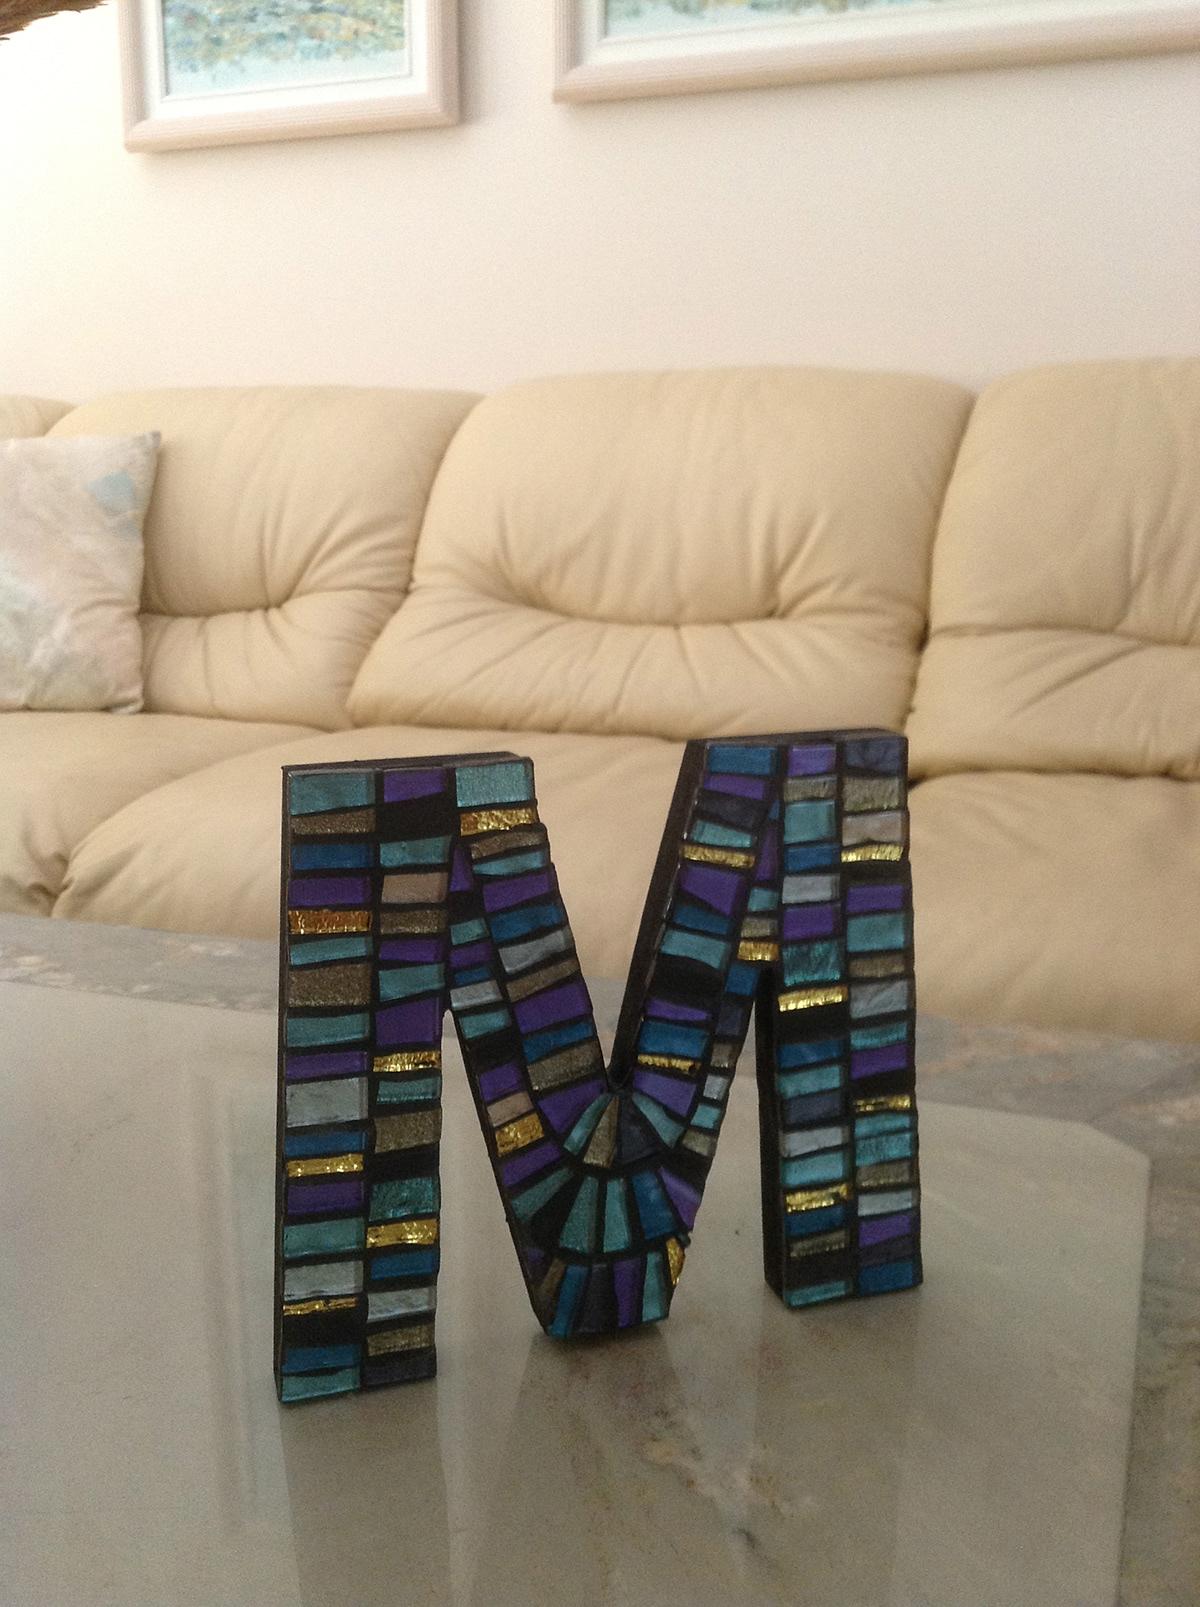 mosaics  initials  Monograms  hand made  artisan  mosaic letters custom made mosaic stained glass  mirror